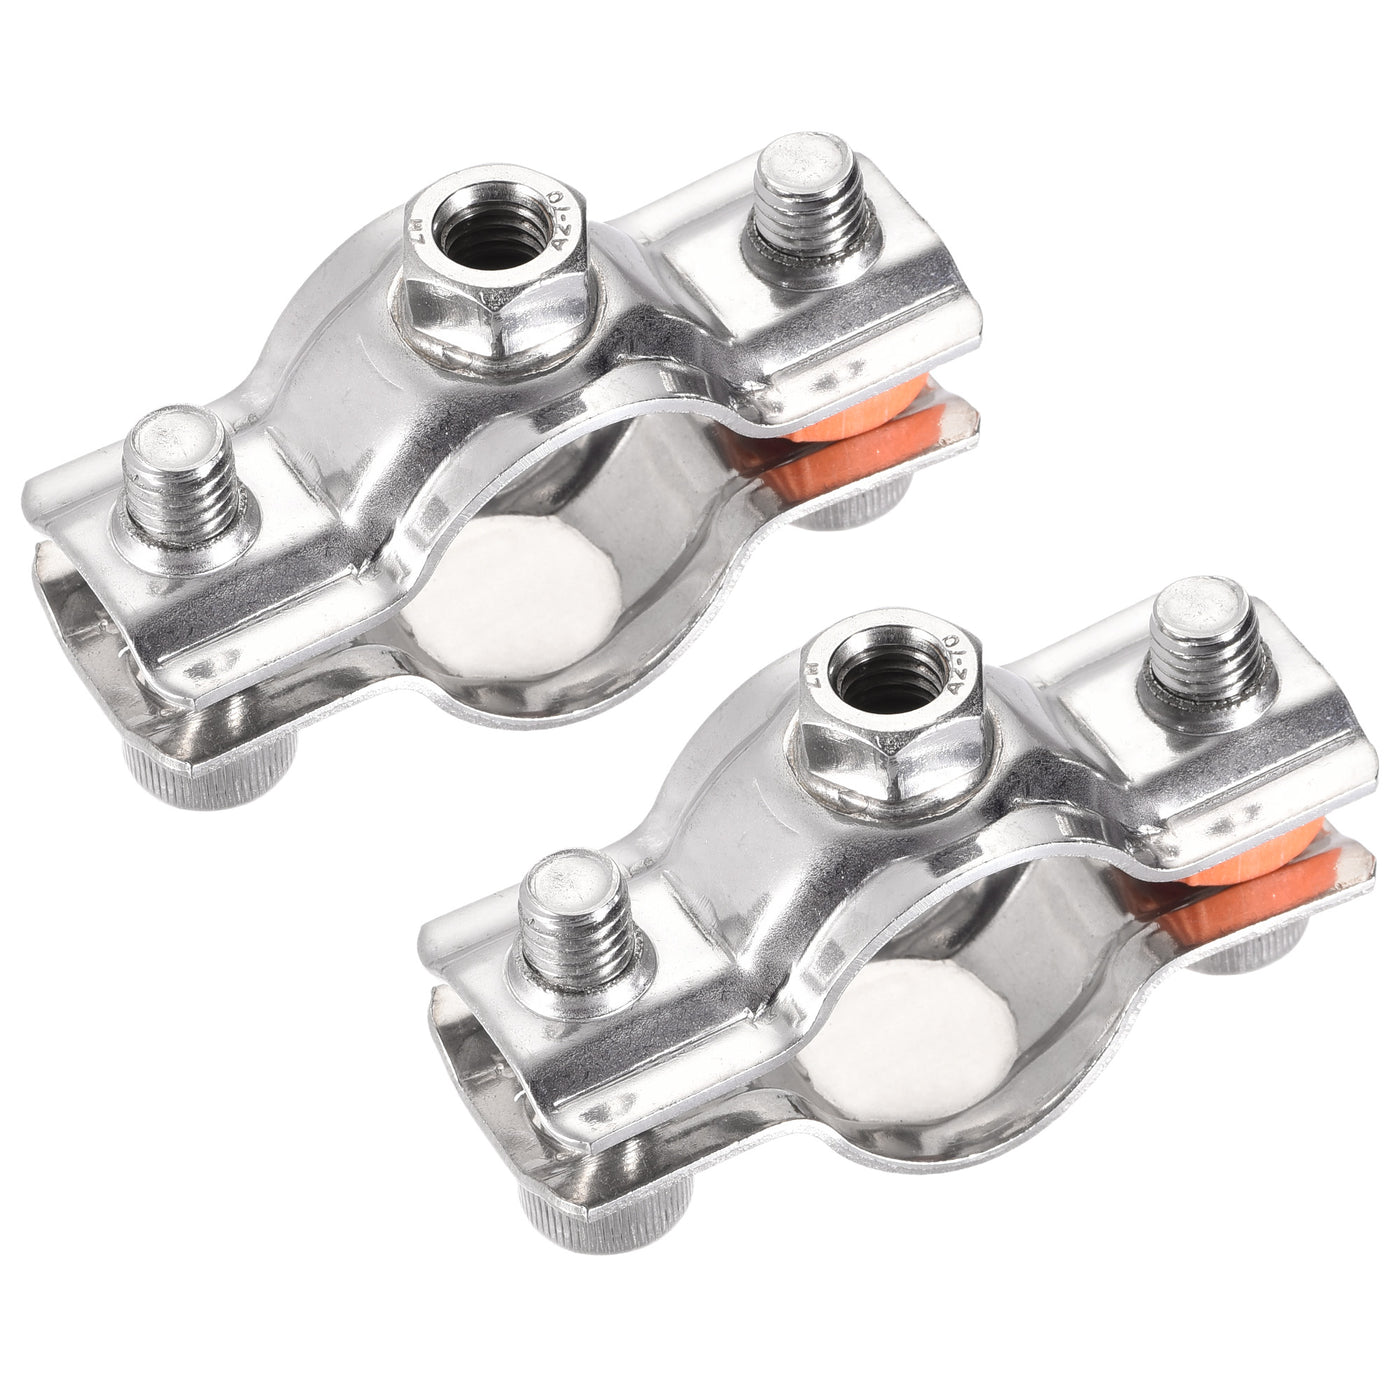 Uxcell Uxcell Wall Ceiling Mount Pipe Supports, 304 Stainless Steel Adjustable Pipe Bracket Clamp for 25-28mm Pipe 2pcs